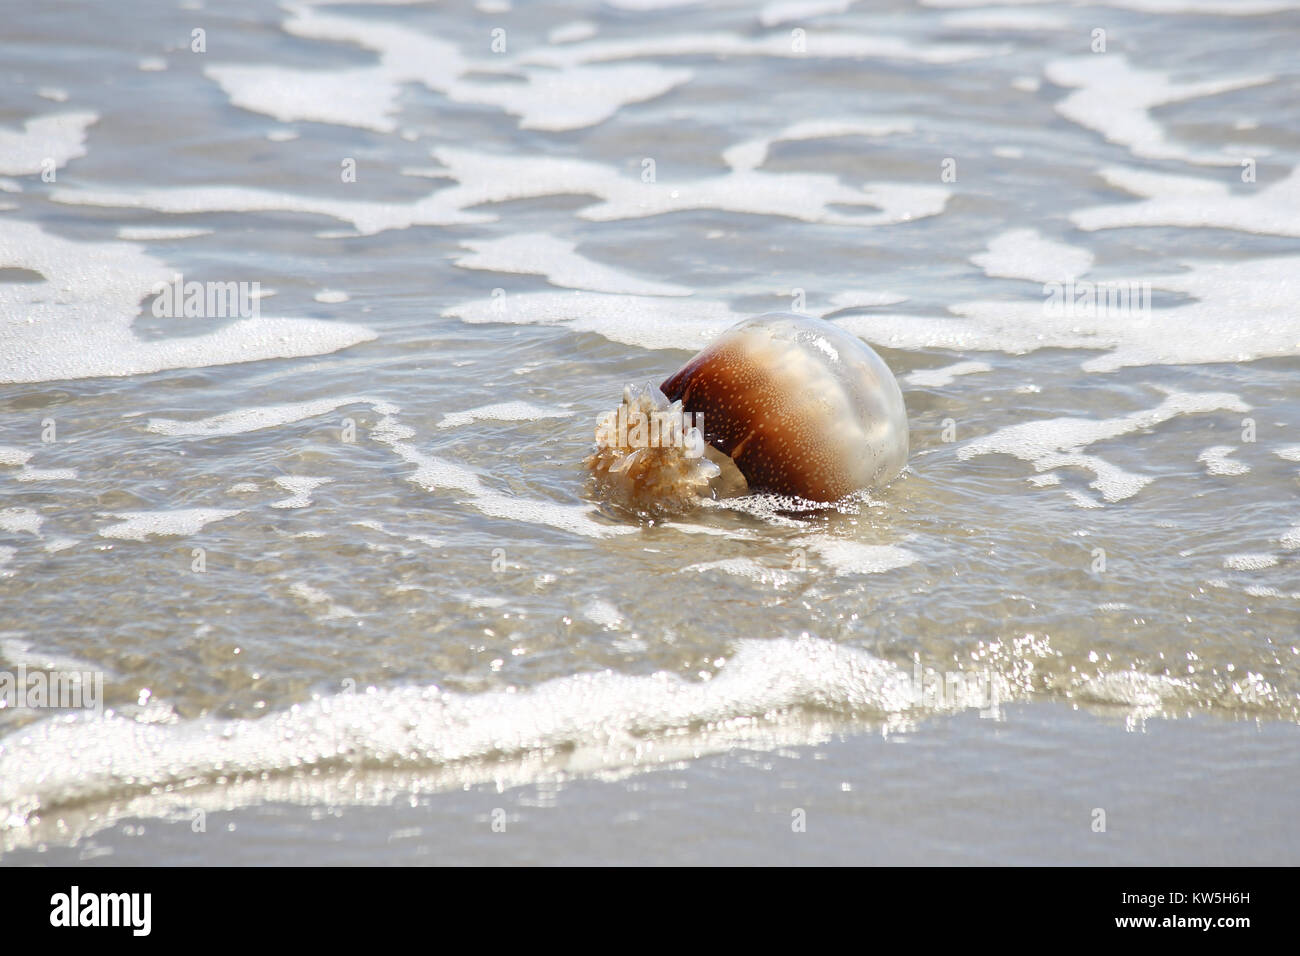 A cannonball jellyfish washed up on a sandy beach. Stock Photo